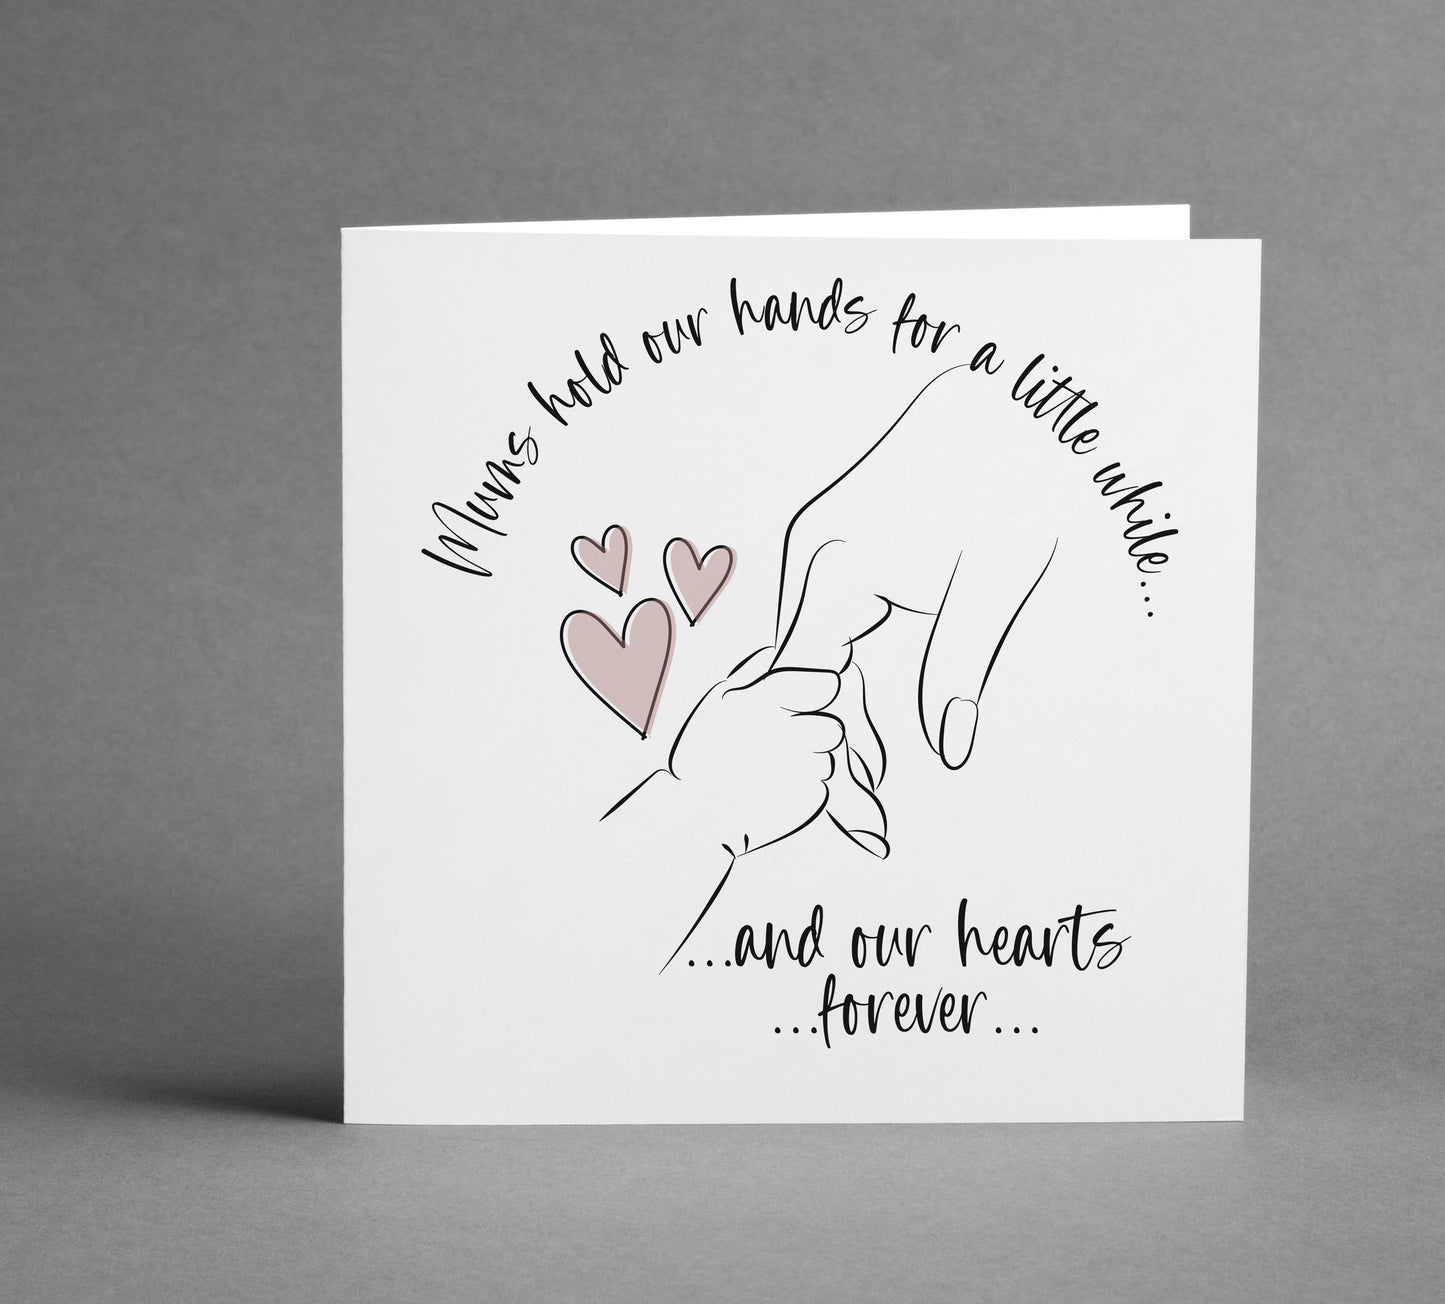 Mums hold our hands for a little while... square card